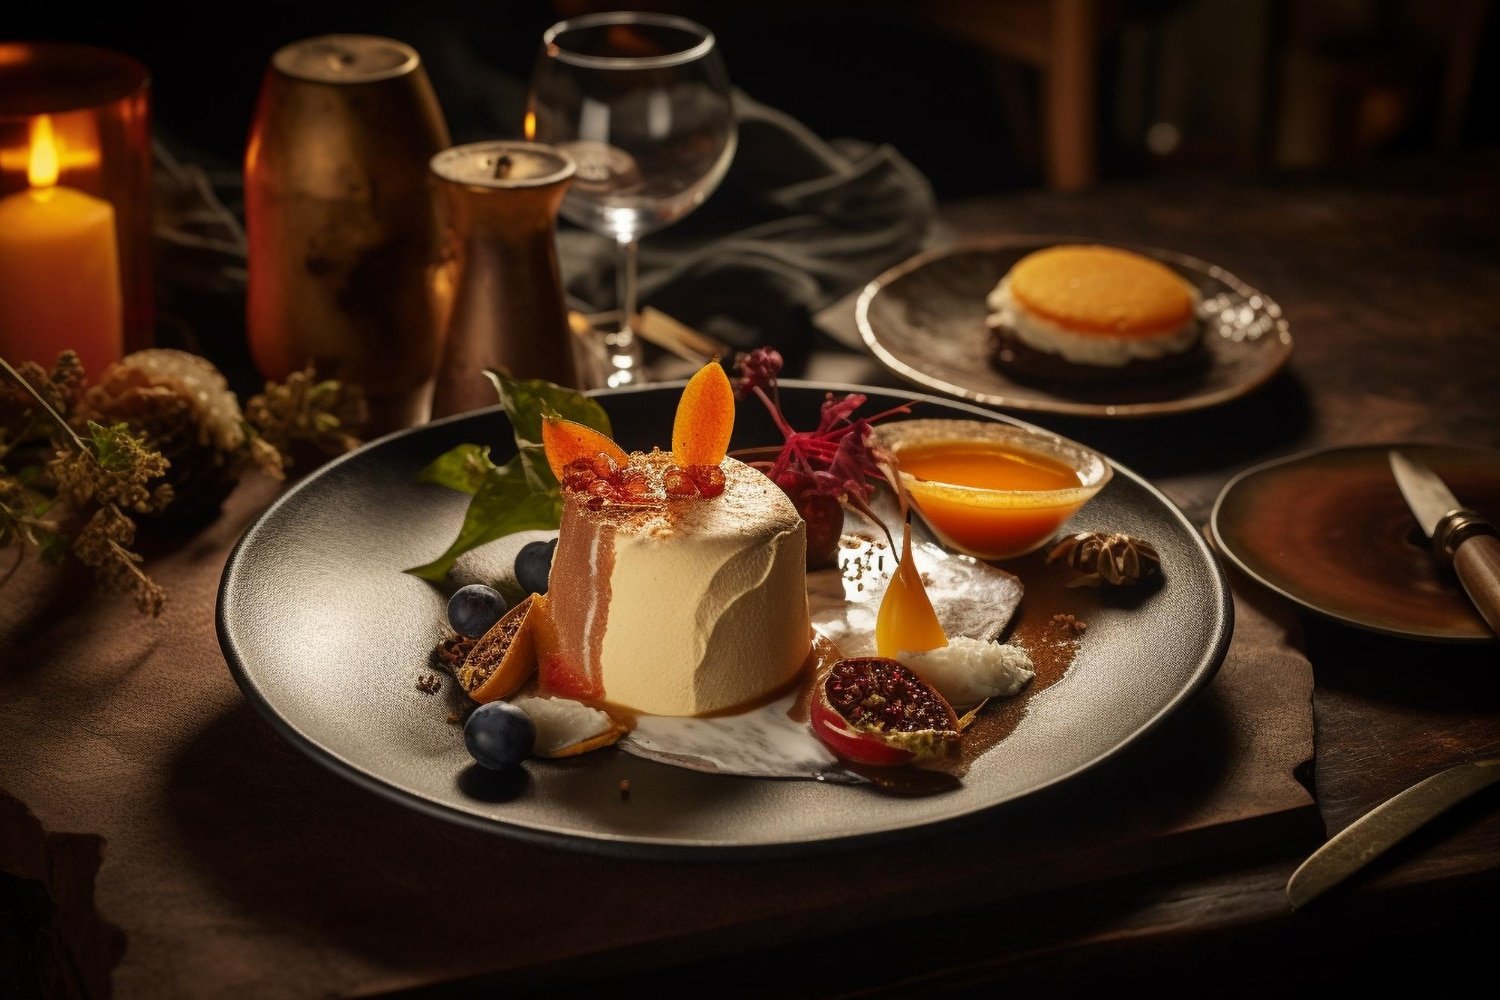 Indulge In French Delicacies With Jesenslebonheur.fr’s Gourmet Food Selections